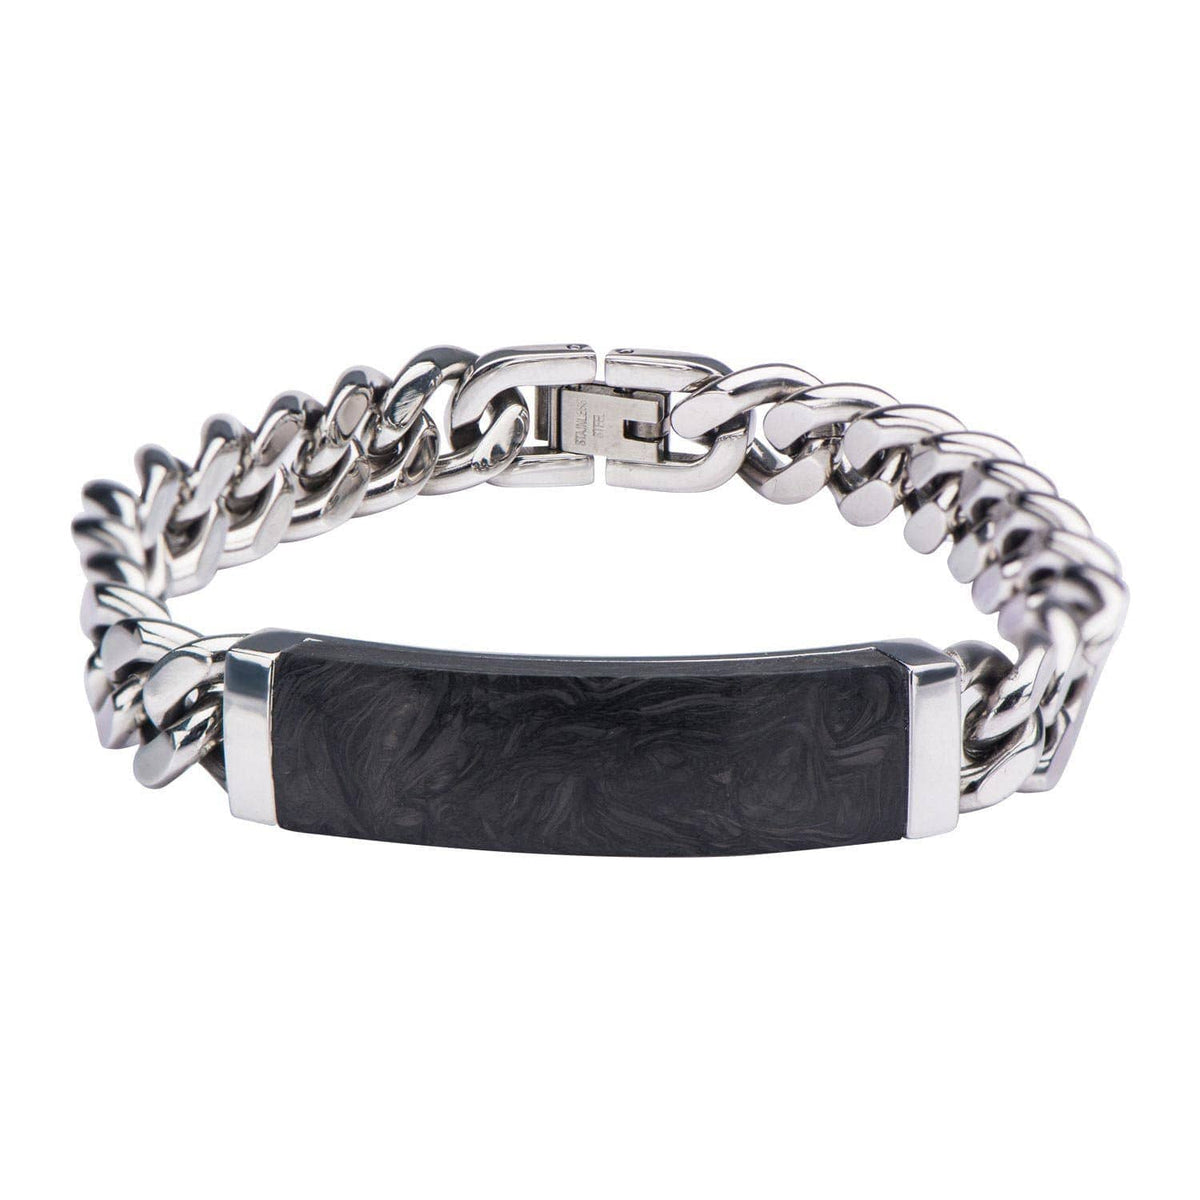 INOX JEWELRY Bracelets Silver Tone Stainless Steel and Black Carbon Graphite ID Bracelet BRCF0017